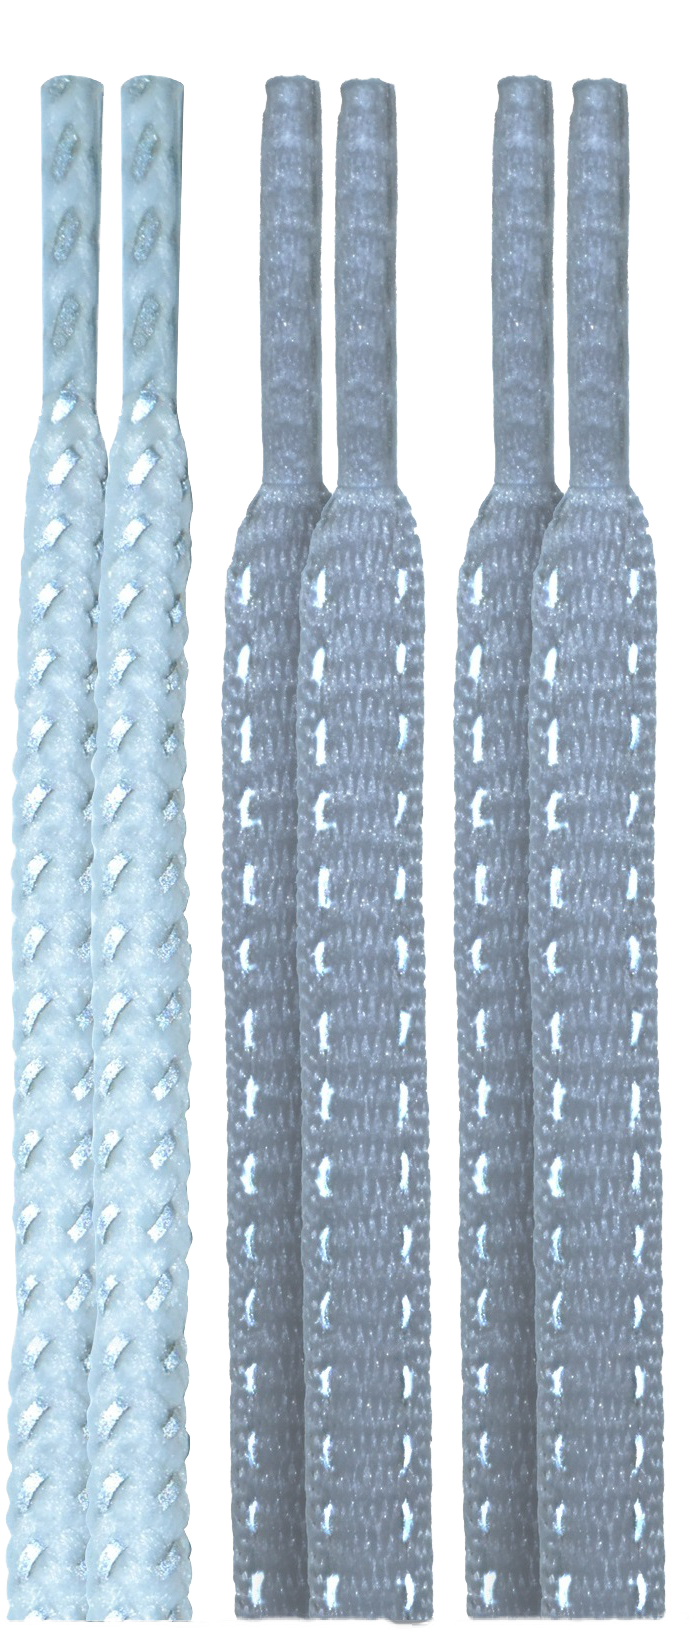 10 Seconds® Reflexall® Athletic Round & Oval Laces | White/Classic Grey/Classic Grey Reflective Multi-Pack